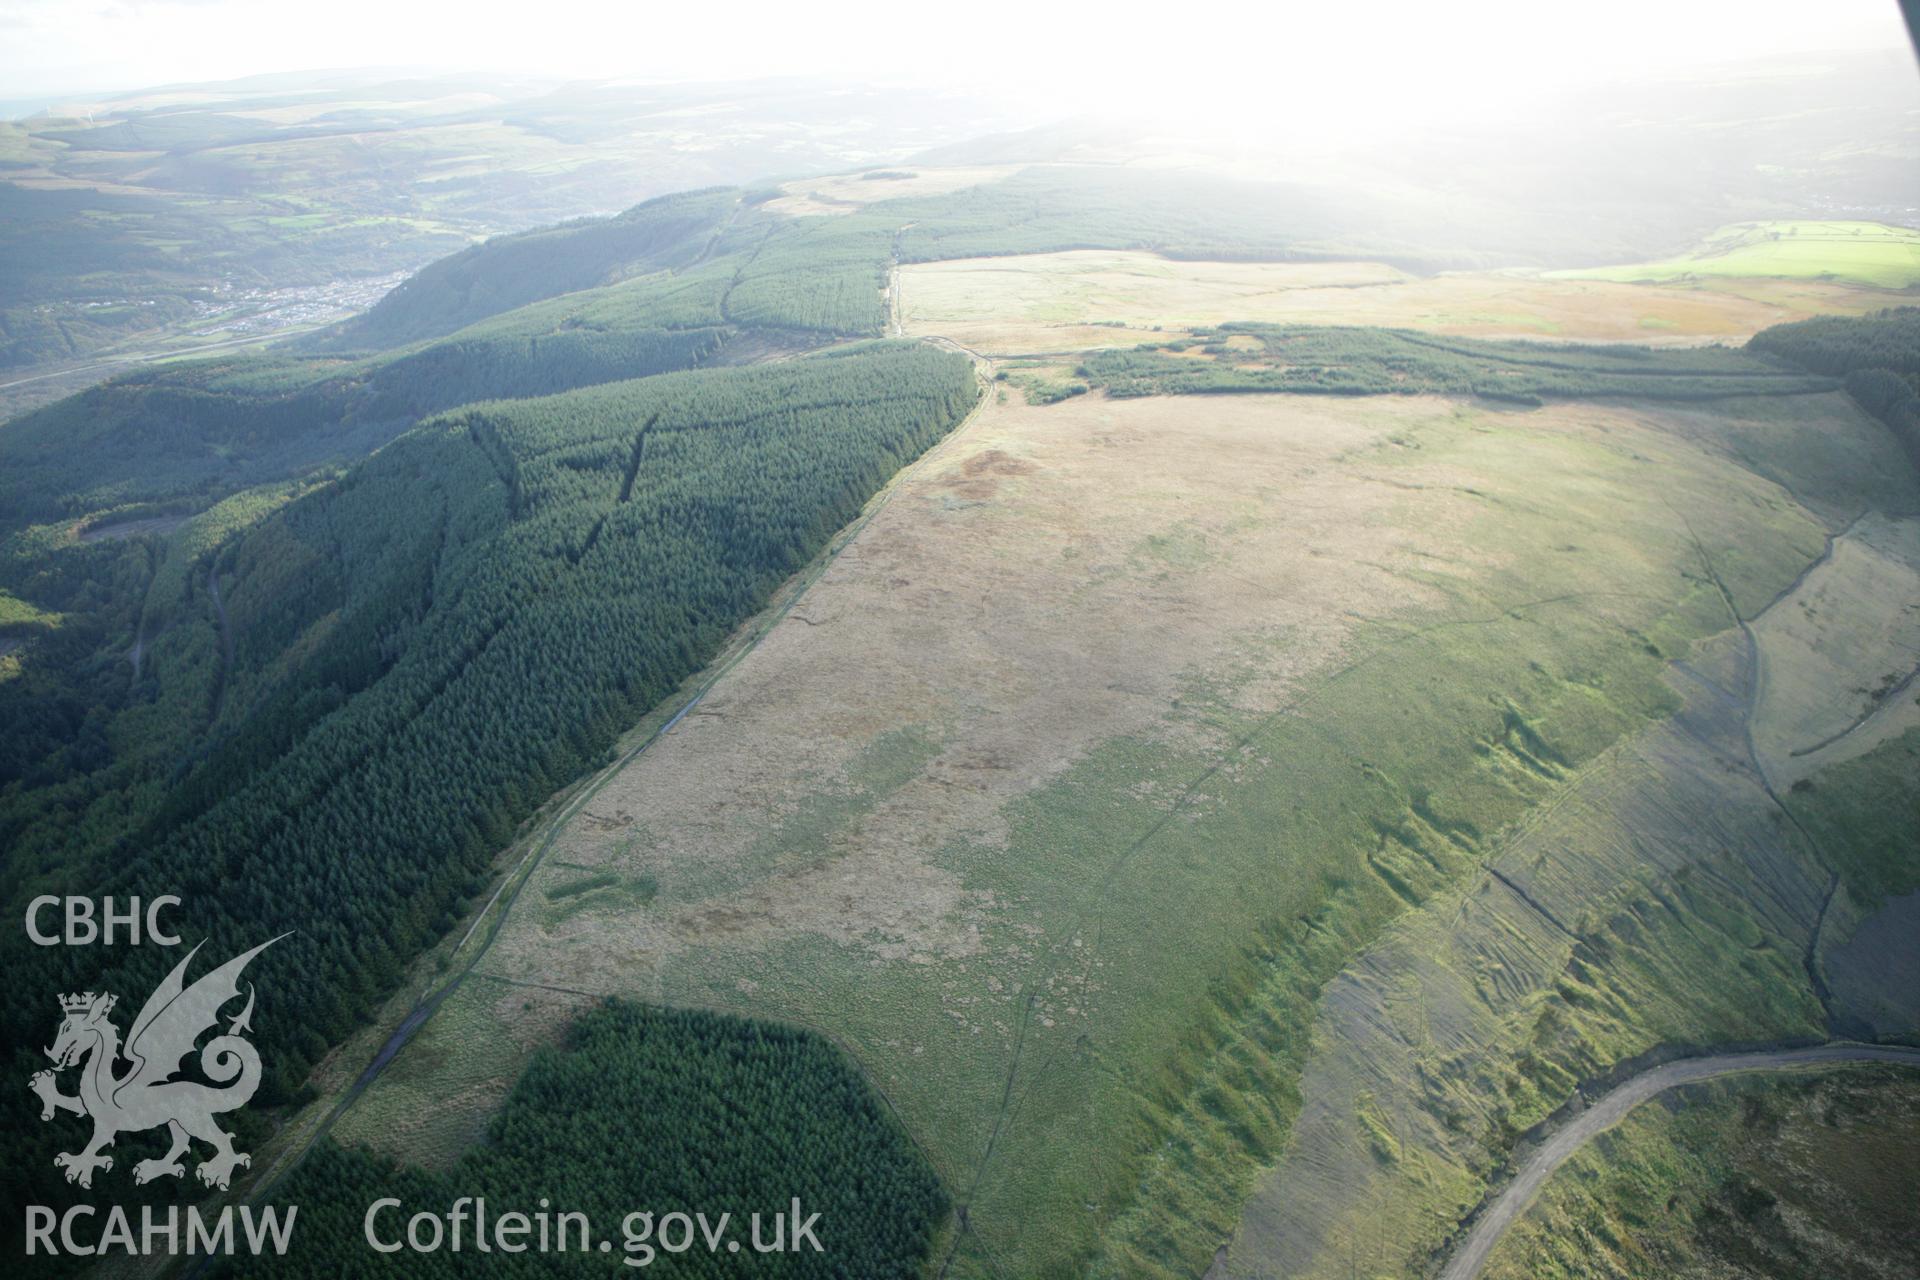 RCAHMW colour oblique photograph of Hirfynydd Roman Fortlet. Taken by Toby Driver on 16/10/2008.